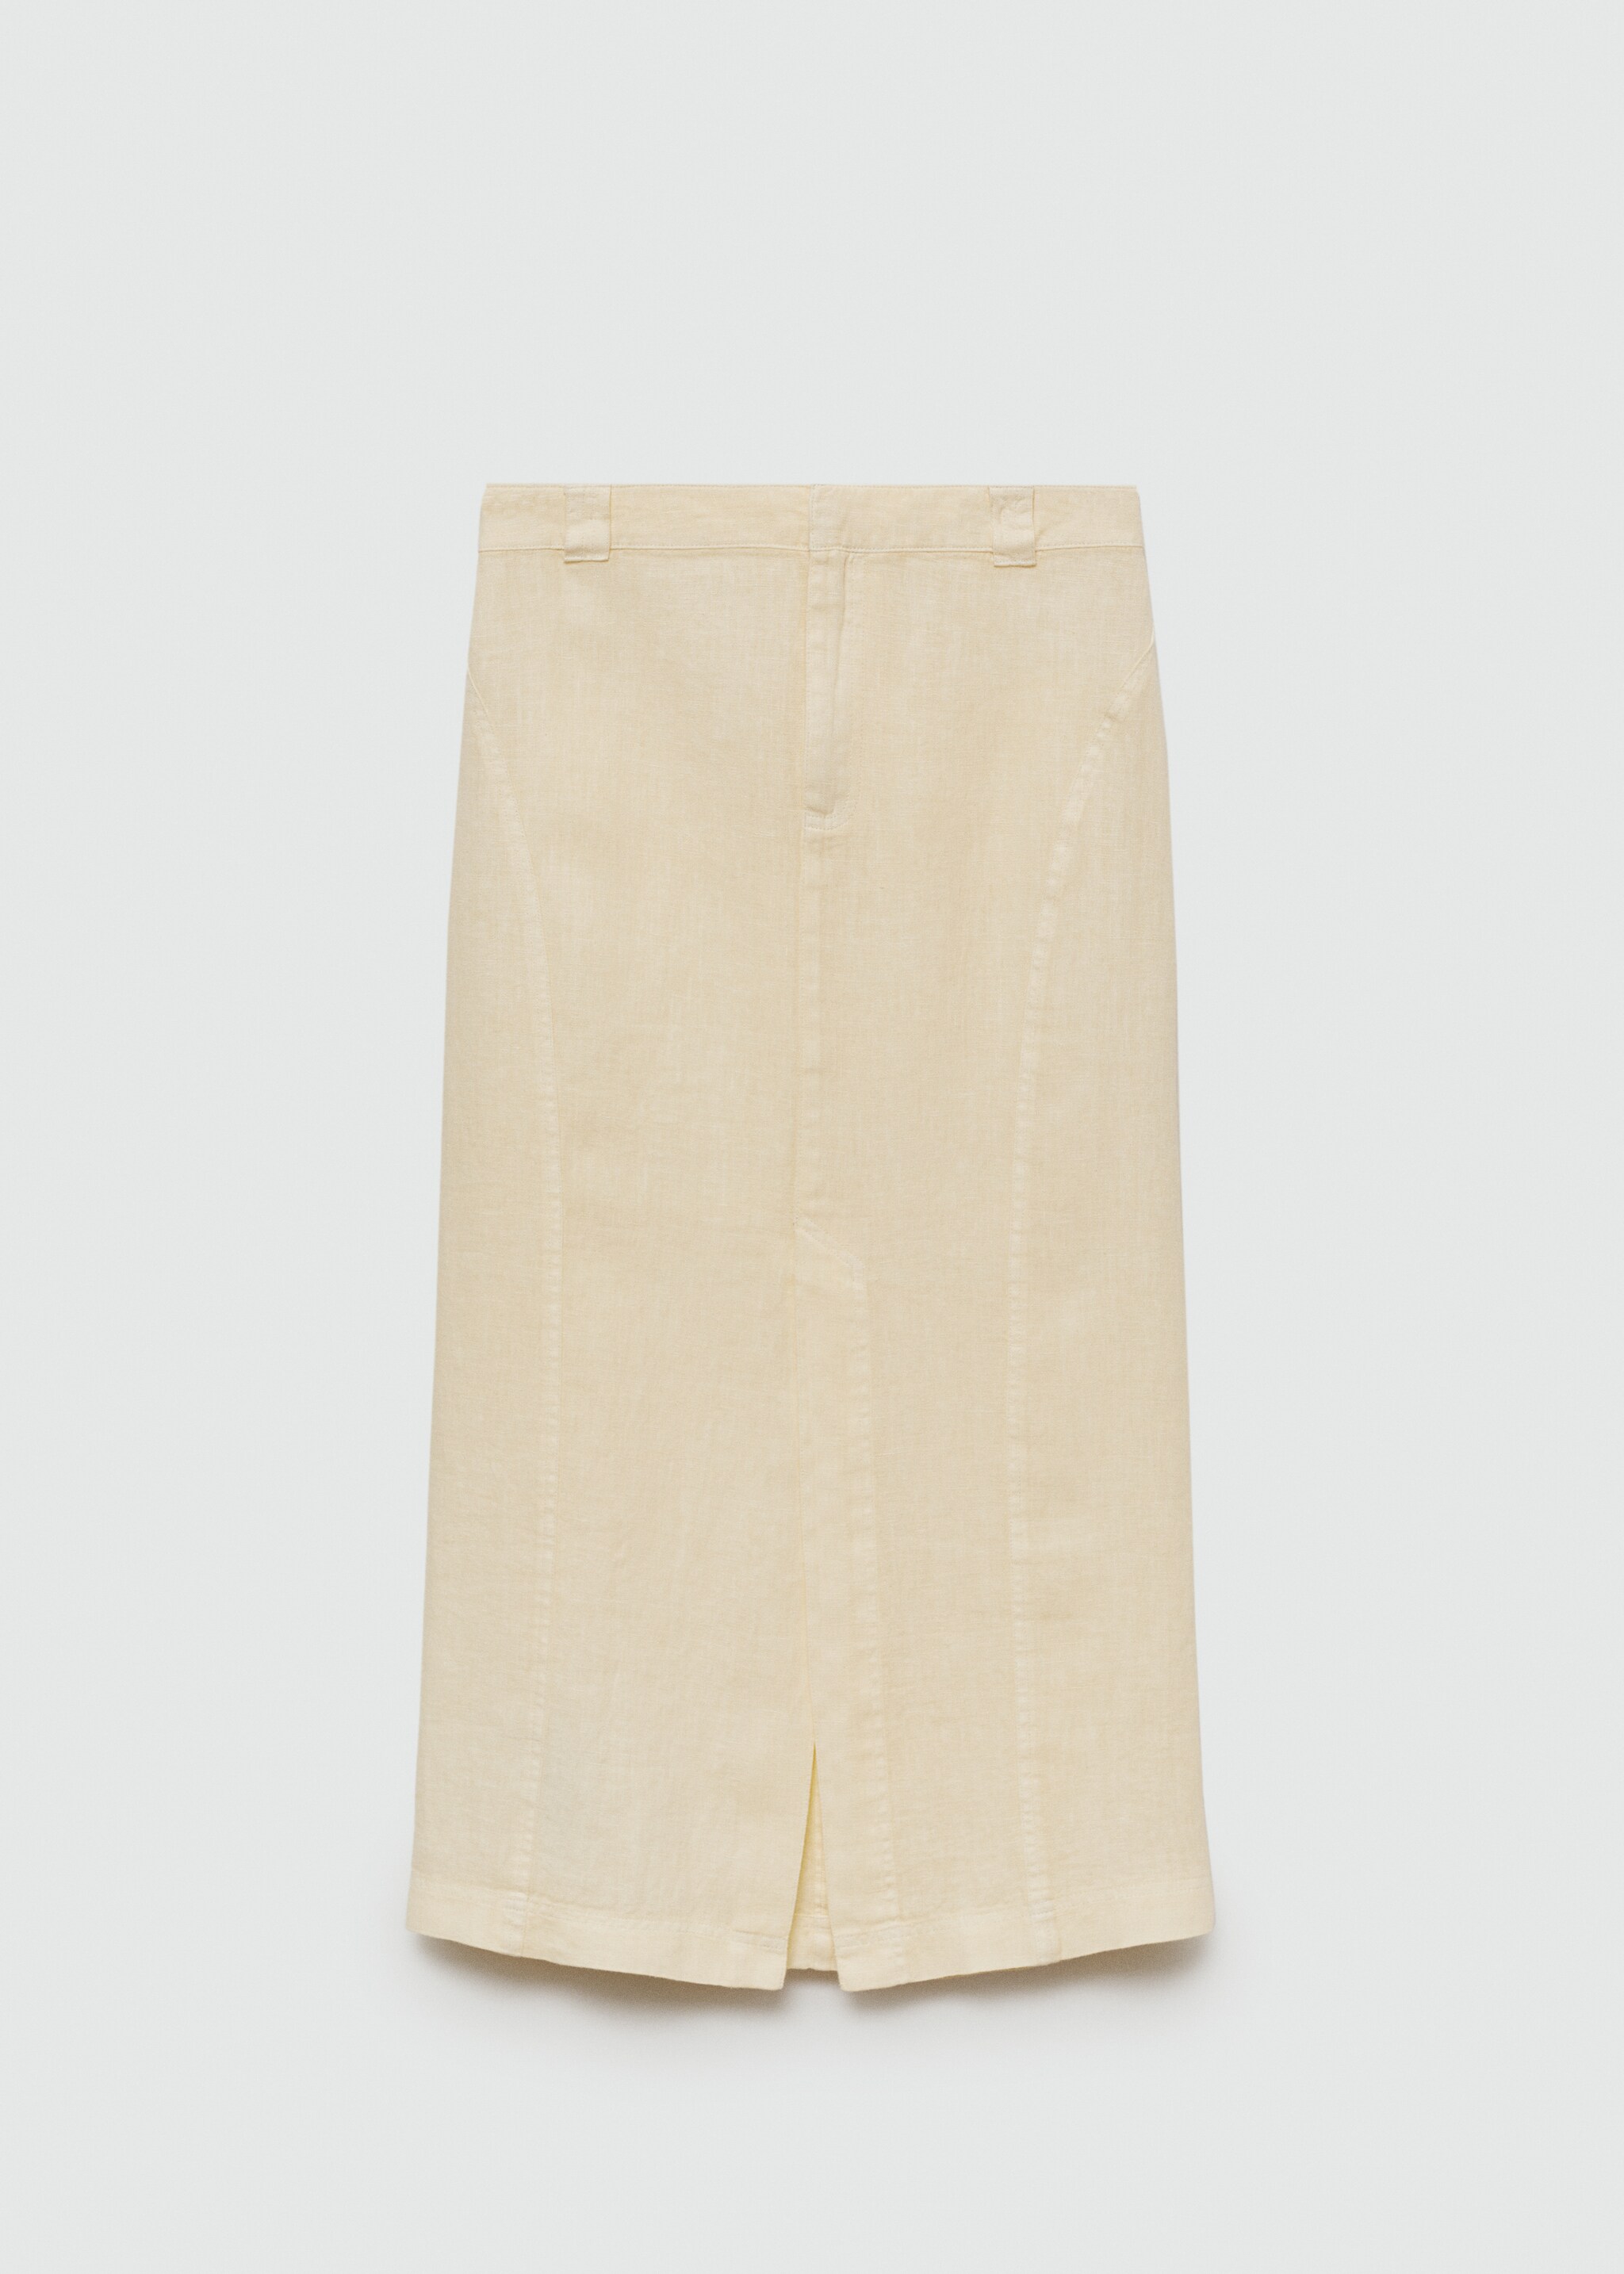 Linen skirt with slit - Article without model